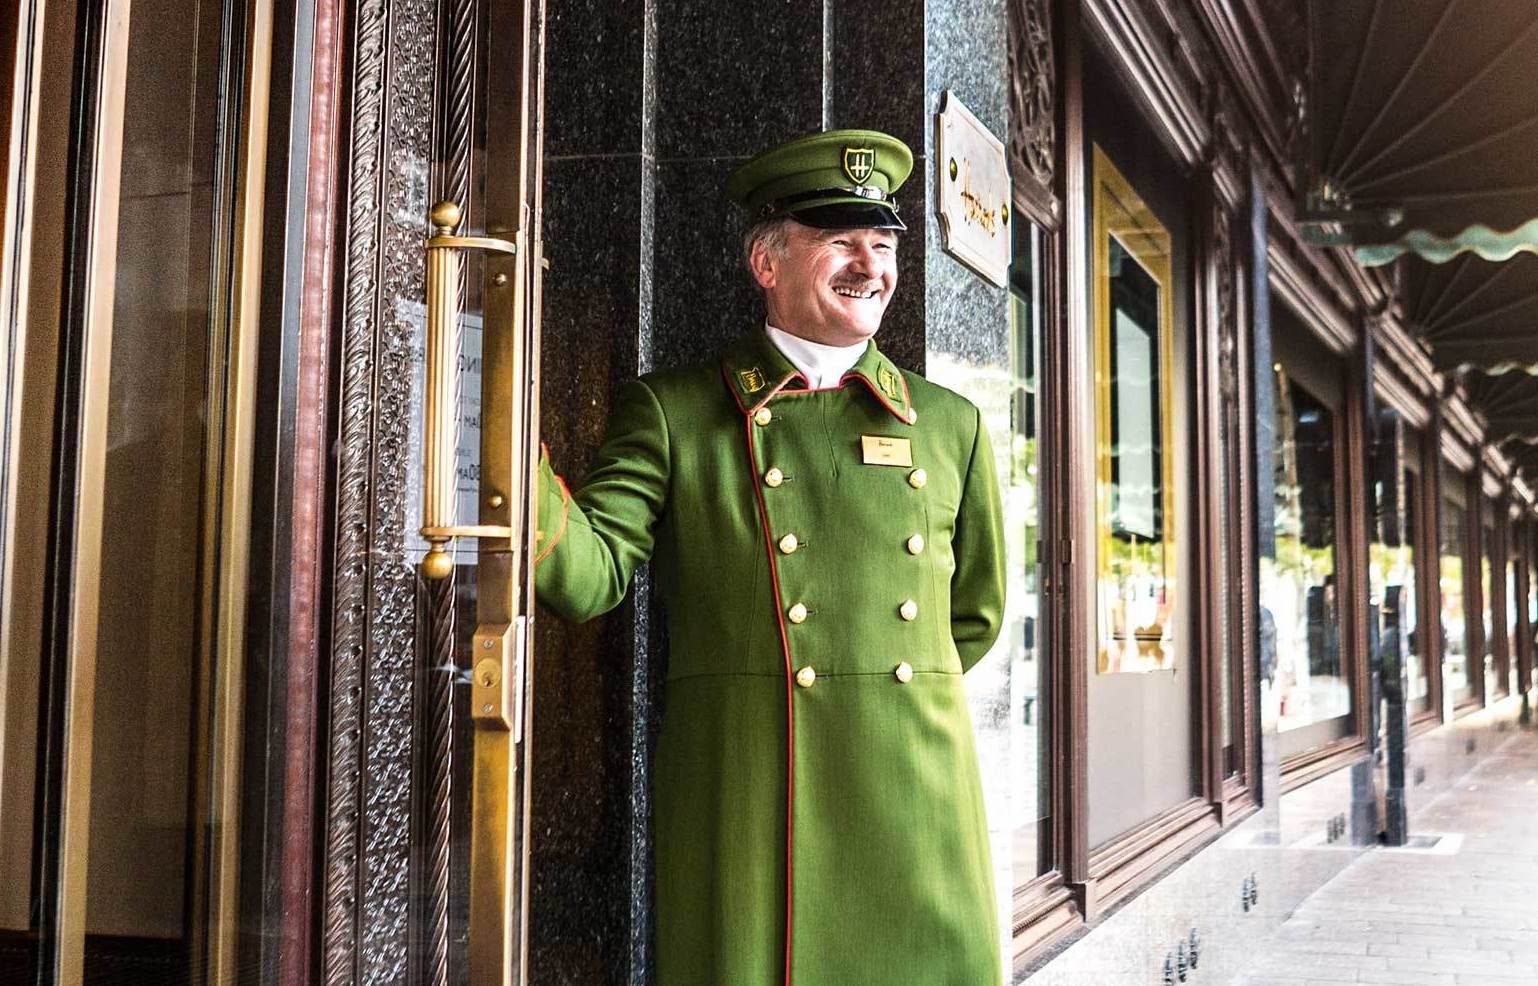 A doorman at the London department store. The Qatar Investment Authority bought it in 2010